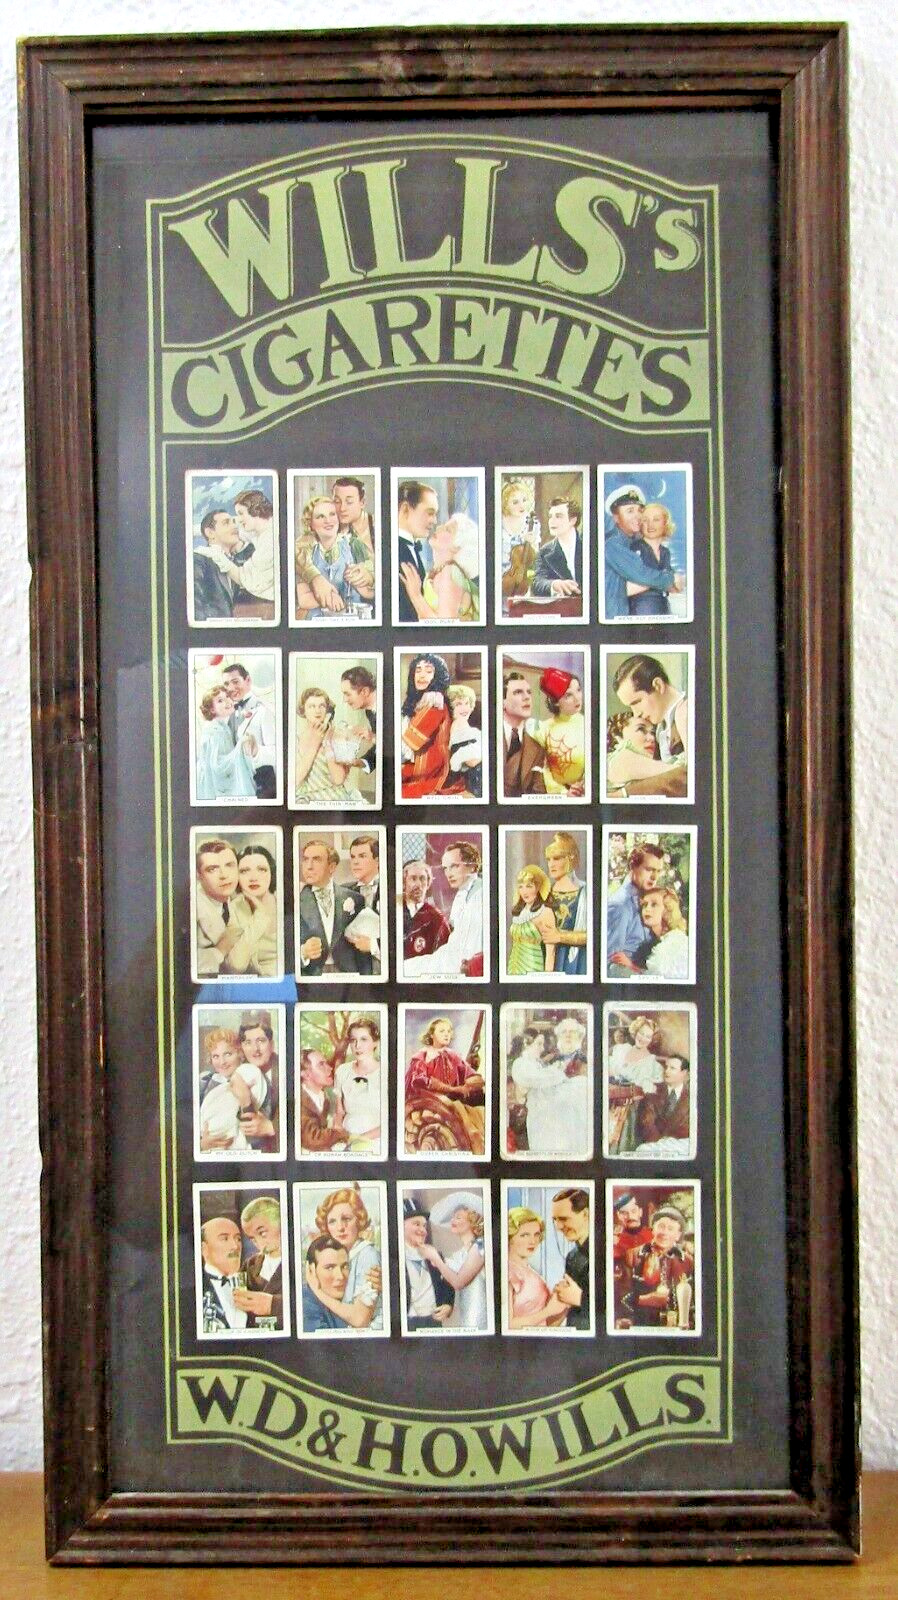 Antique Framed Will\'s Cigarettes Cards W.D. & H.O. Wills circa 1900